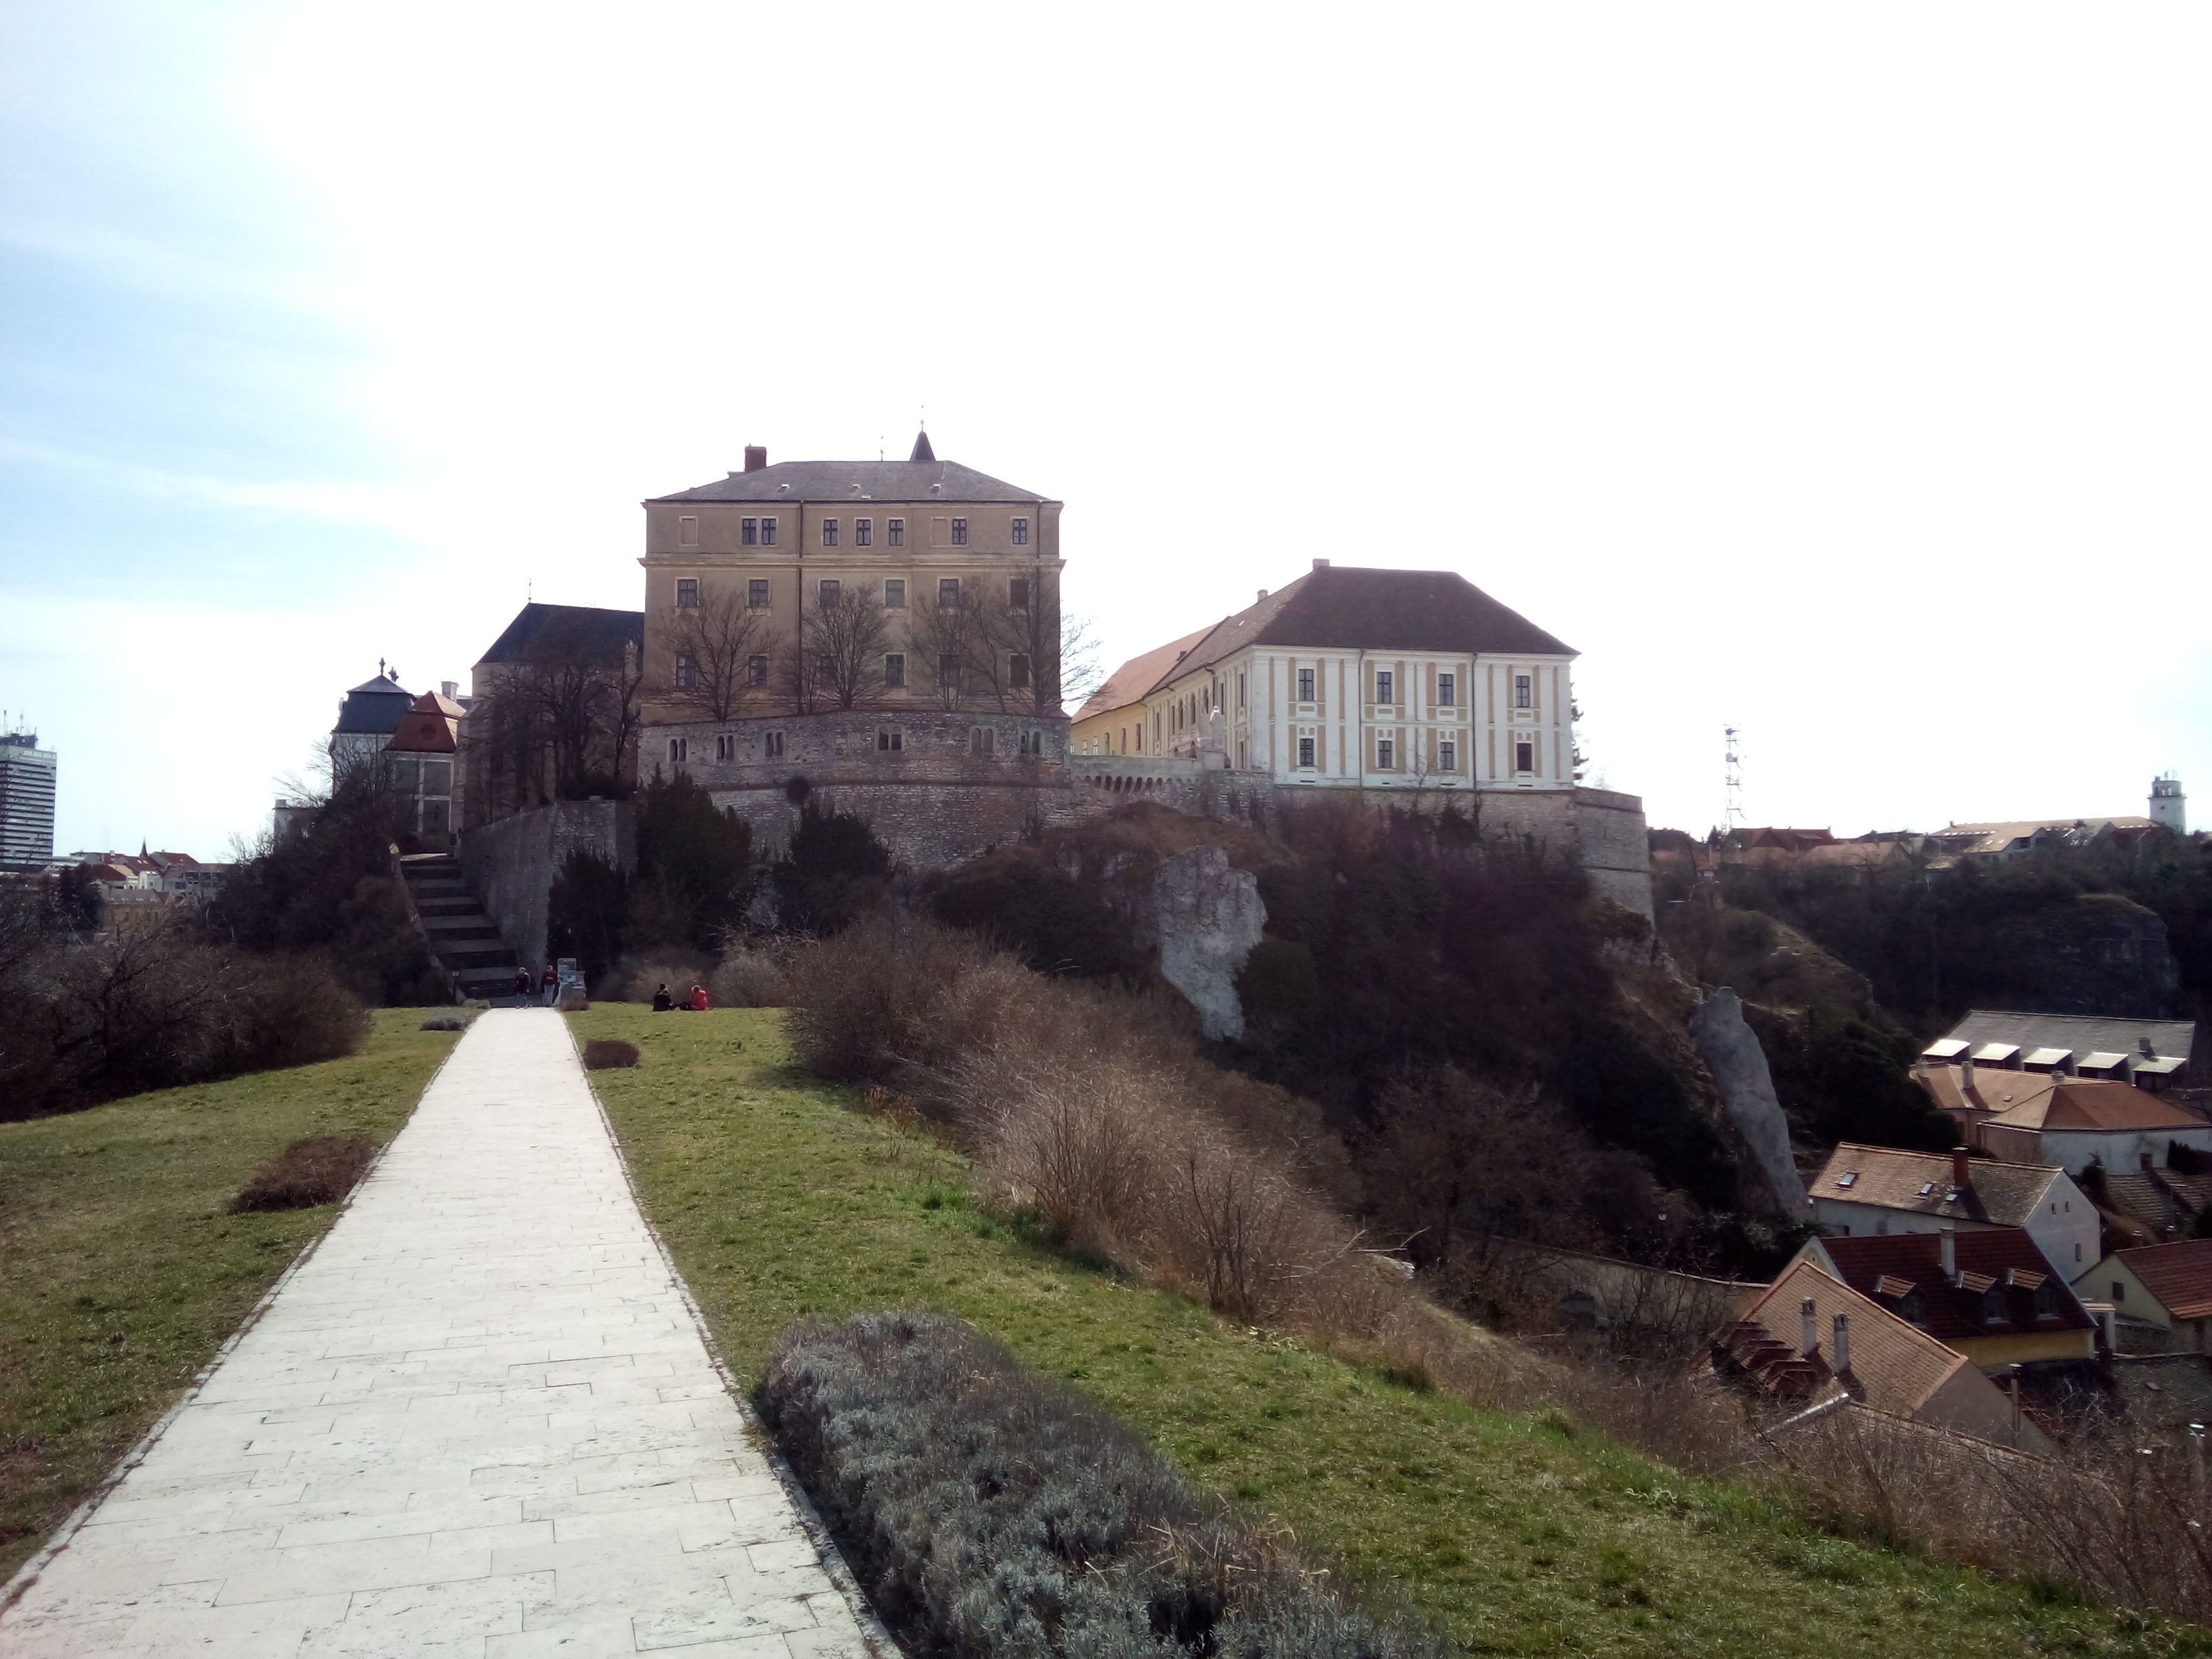 Castle in Veszprém, as viewed from Benedict's Hill